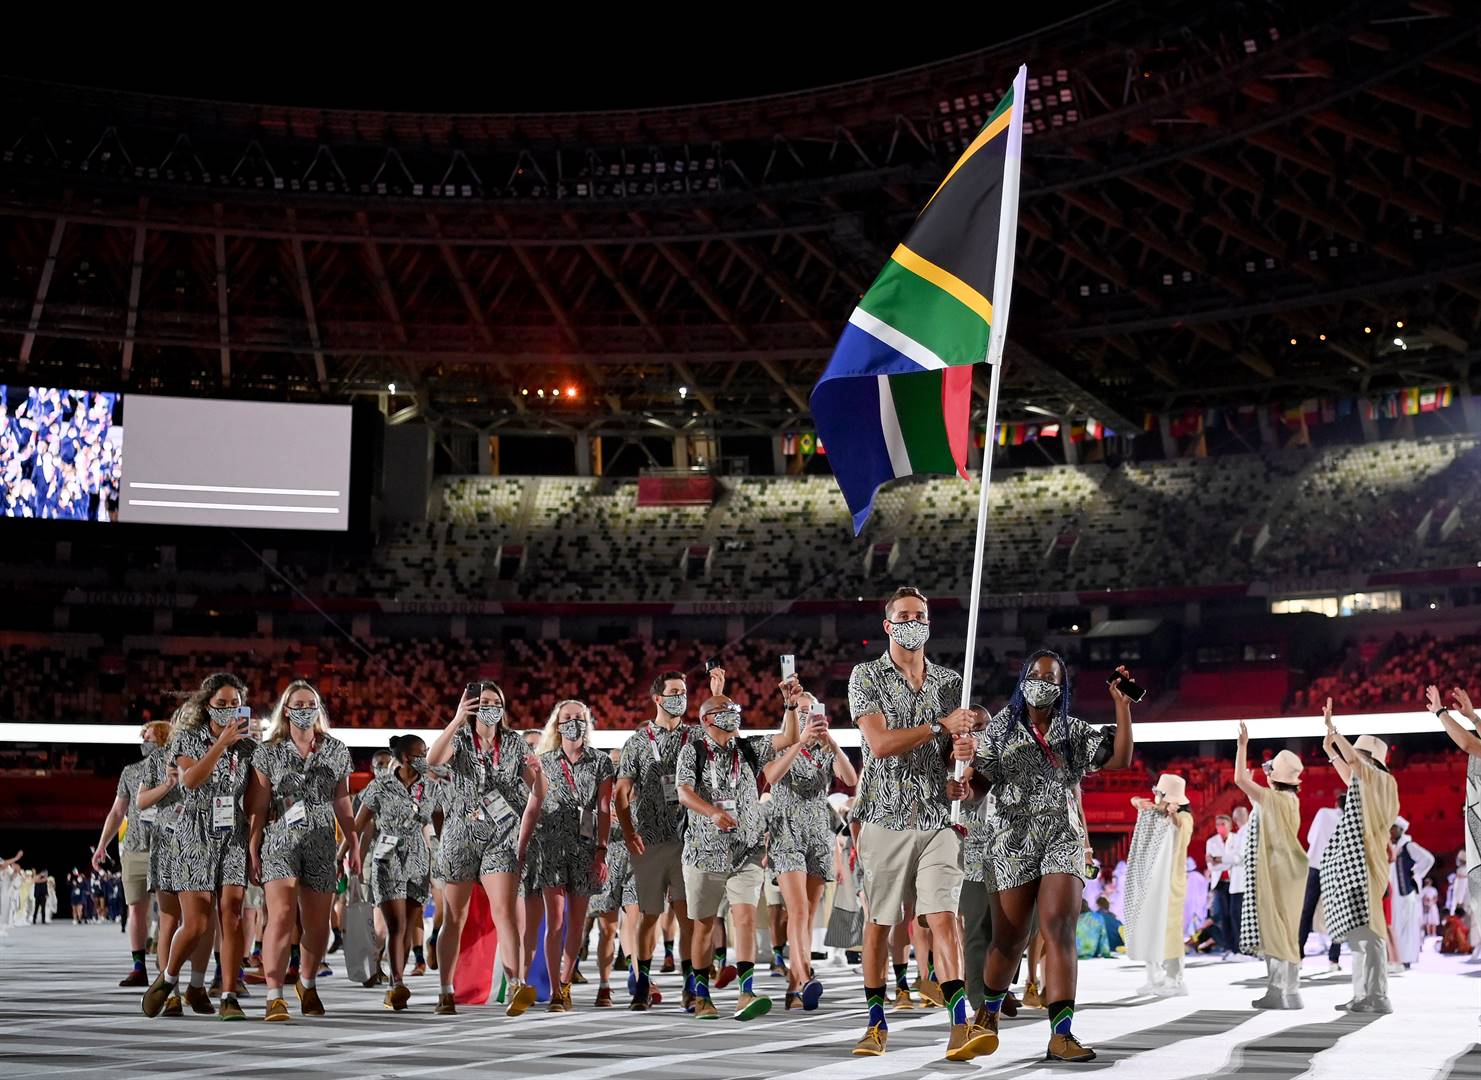 Phumelela Luphumlo Mbande and Chad le Clos lead Team SA into the arena at Olympic Stadium during the opening ceremony of the Tokyo 2020 Olympic Games on Friday. Photo: Matthias Hangst/Getty Images